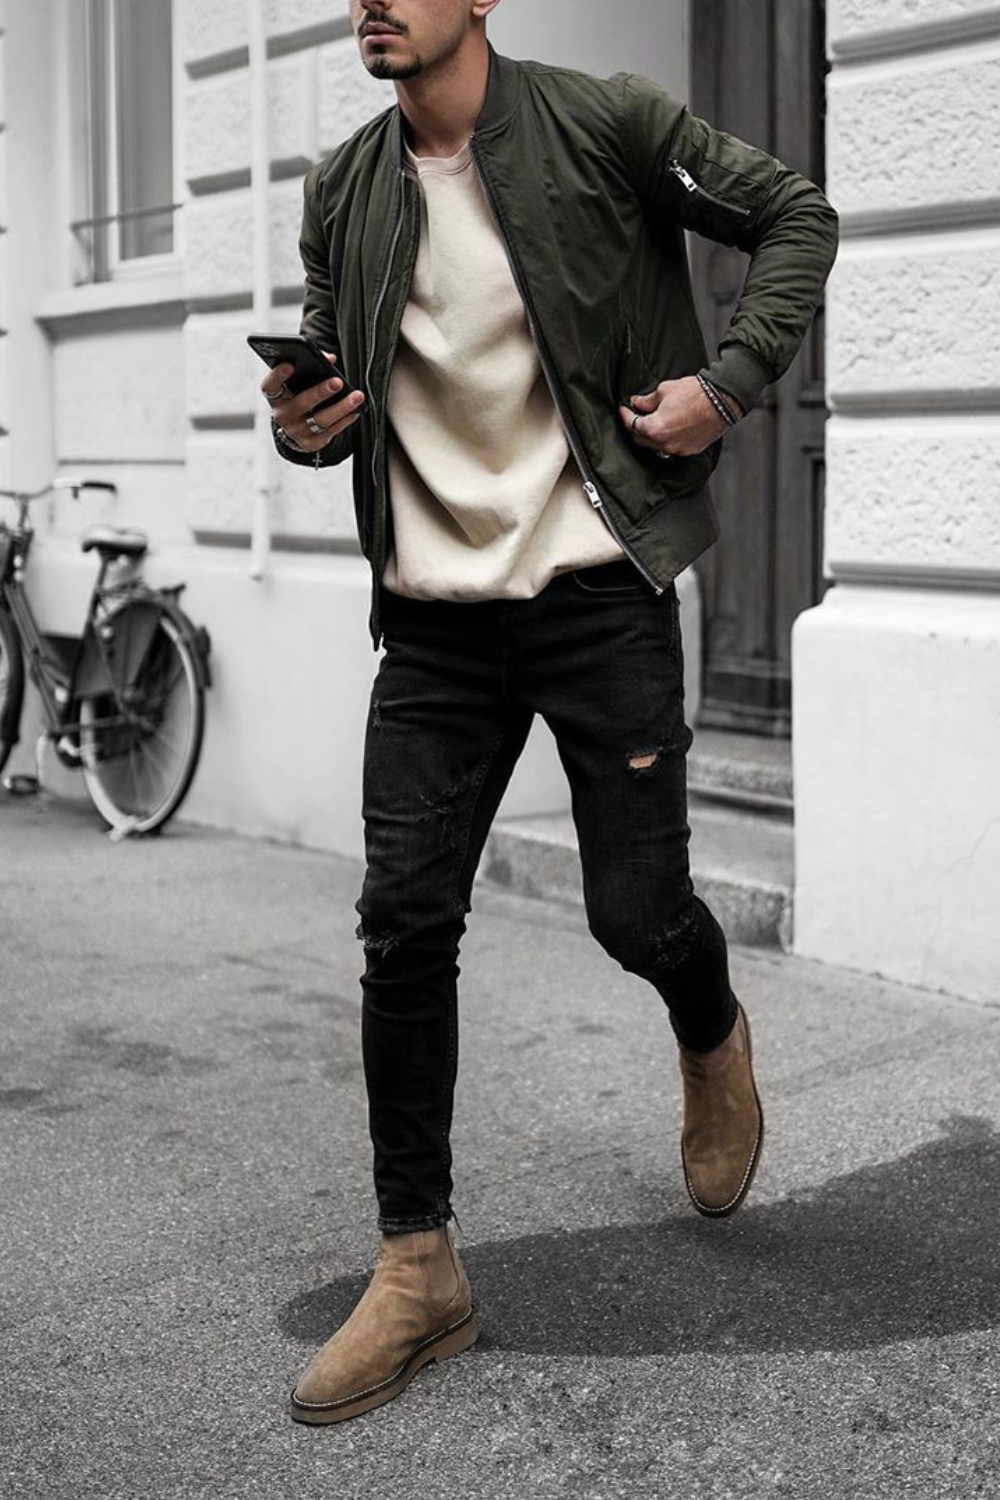 The Art Of Layering Clothes - The Art Of Layering Clothes -   19 style Fashion men ideas